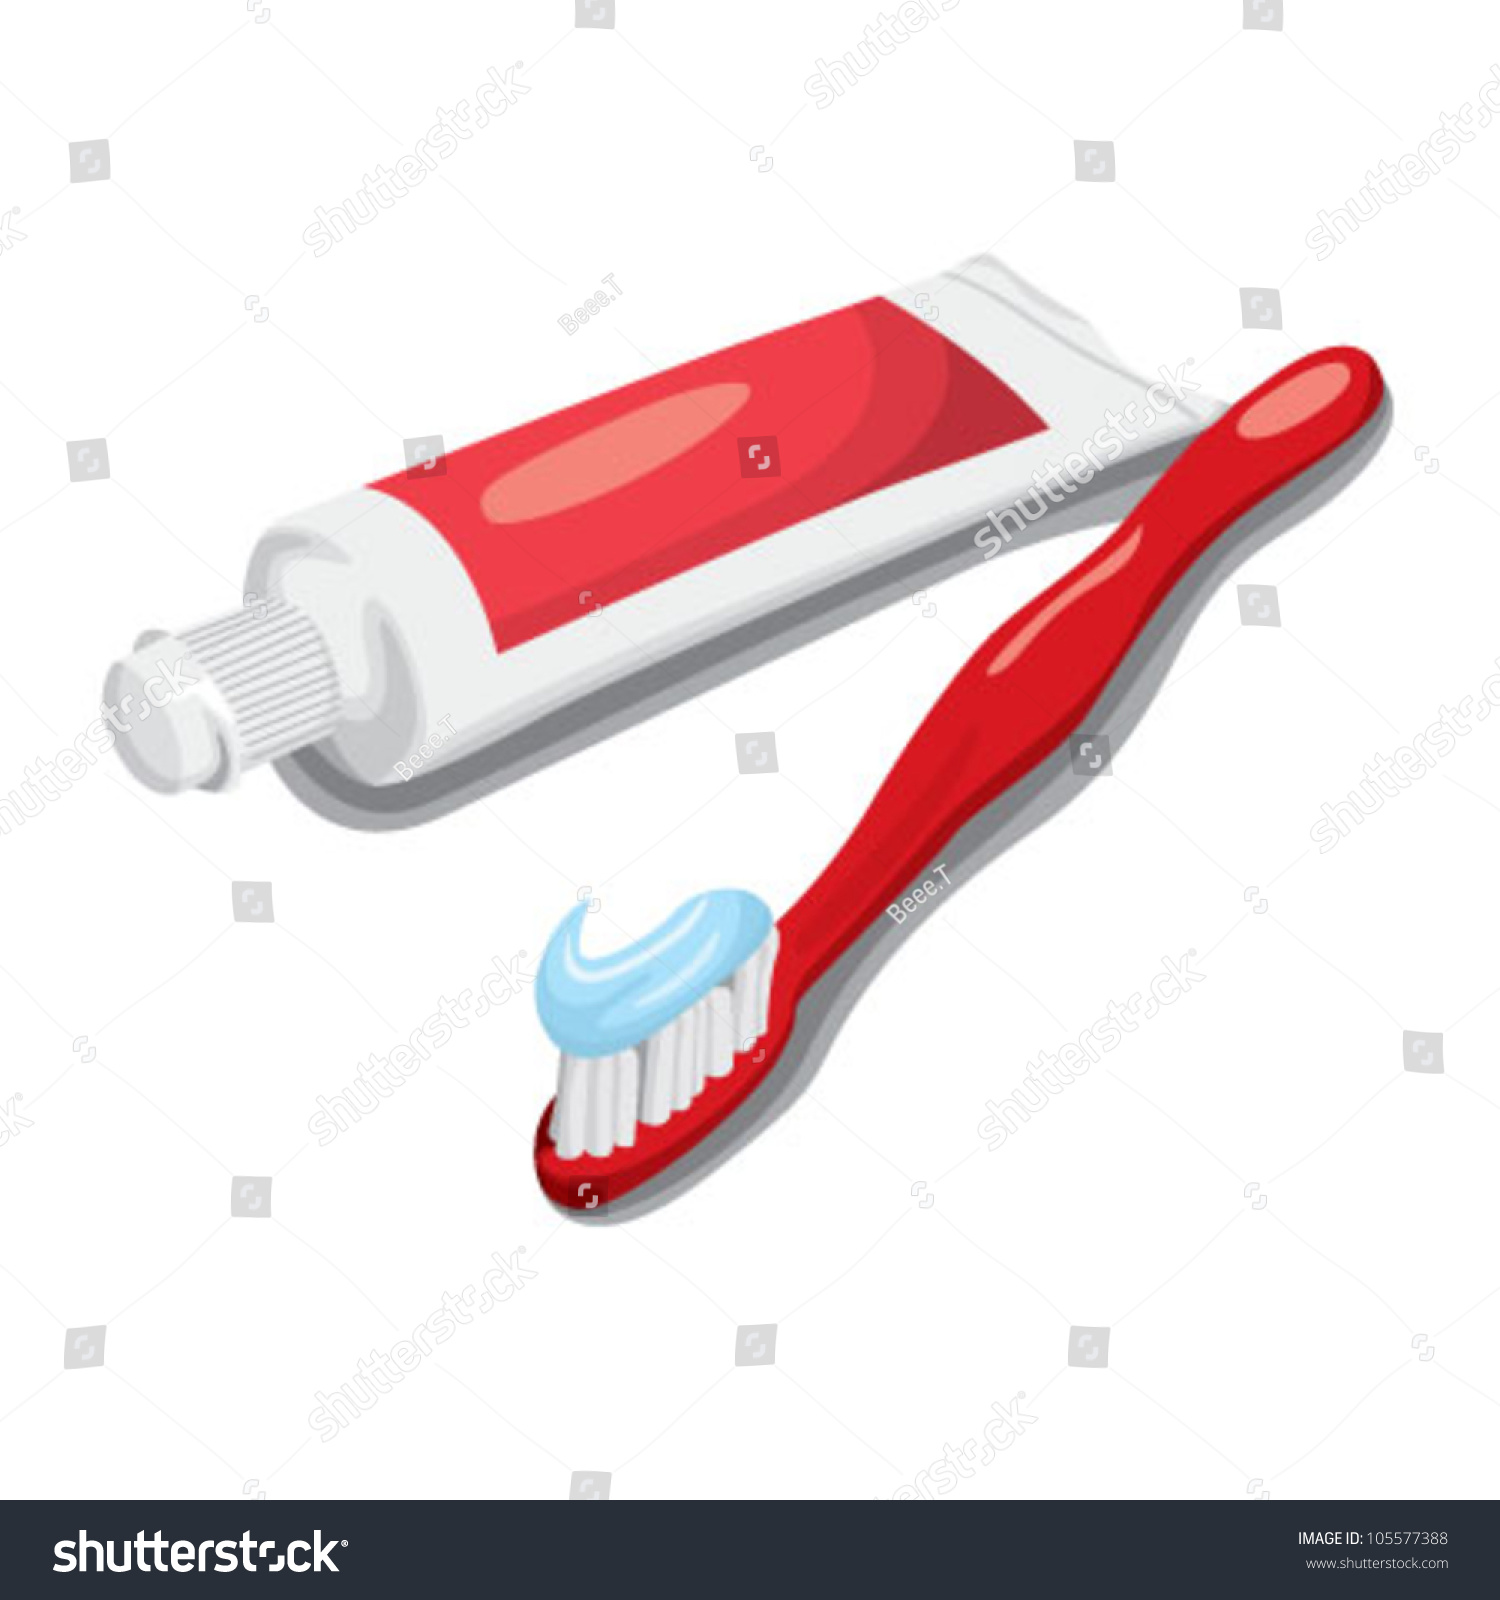 clipart toothbrush and toothpaste - photo #40